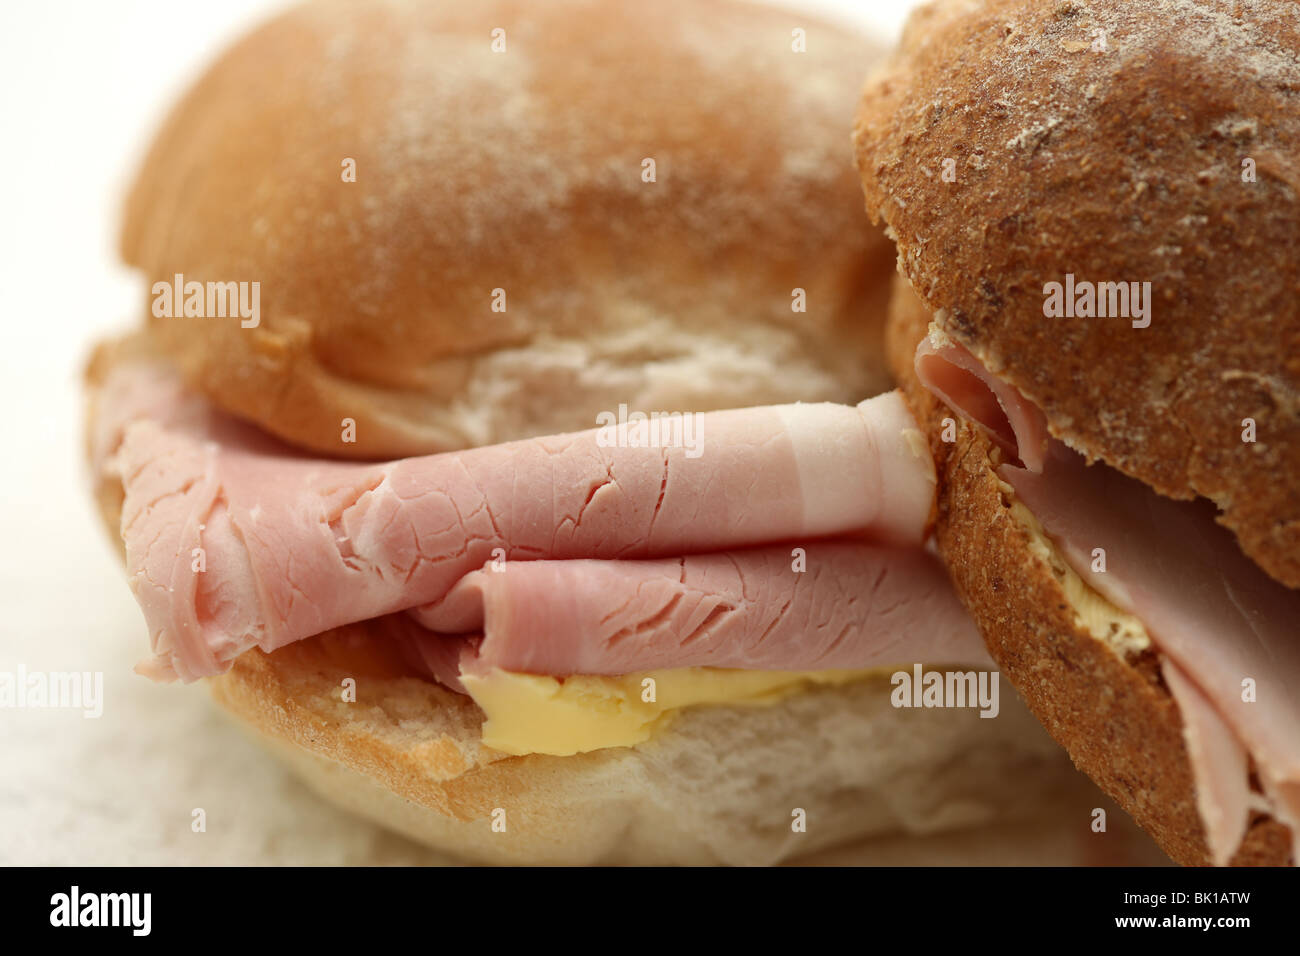 Fresh Healthy Cooked Ham Bread Roll With No People Stock Photo